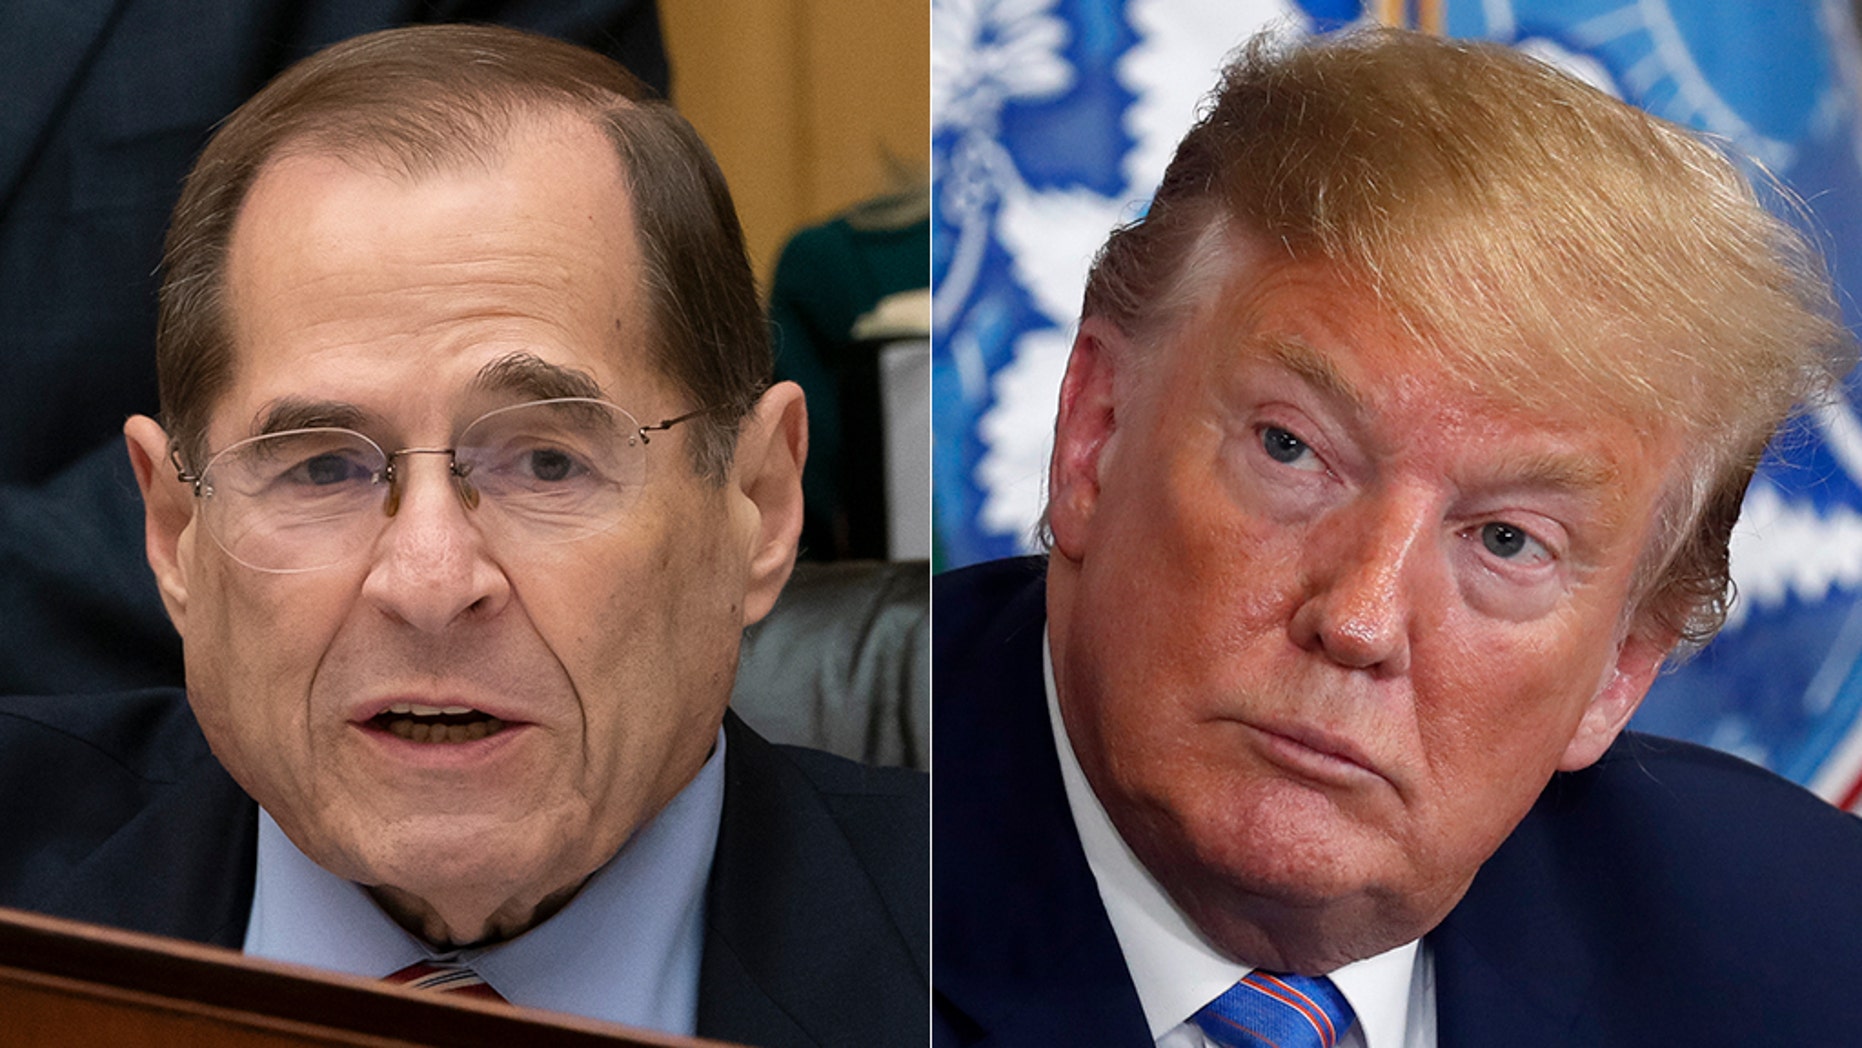 The Speaker of the Judiciary of the House, Jerrold Nadler, D-N.Y., Intensified his attacks on President Trump, calling the administration of 